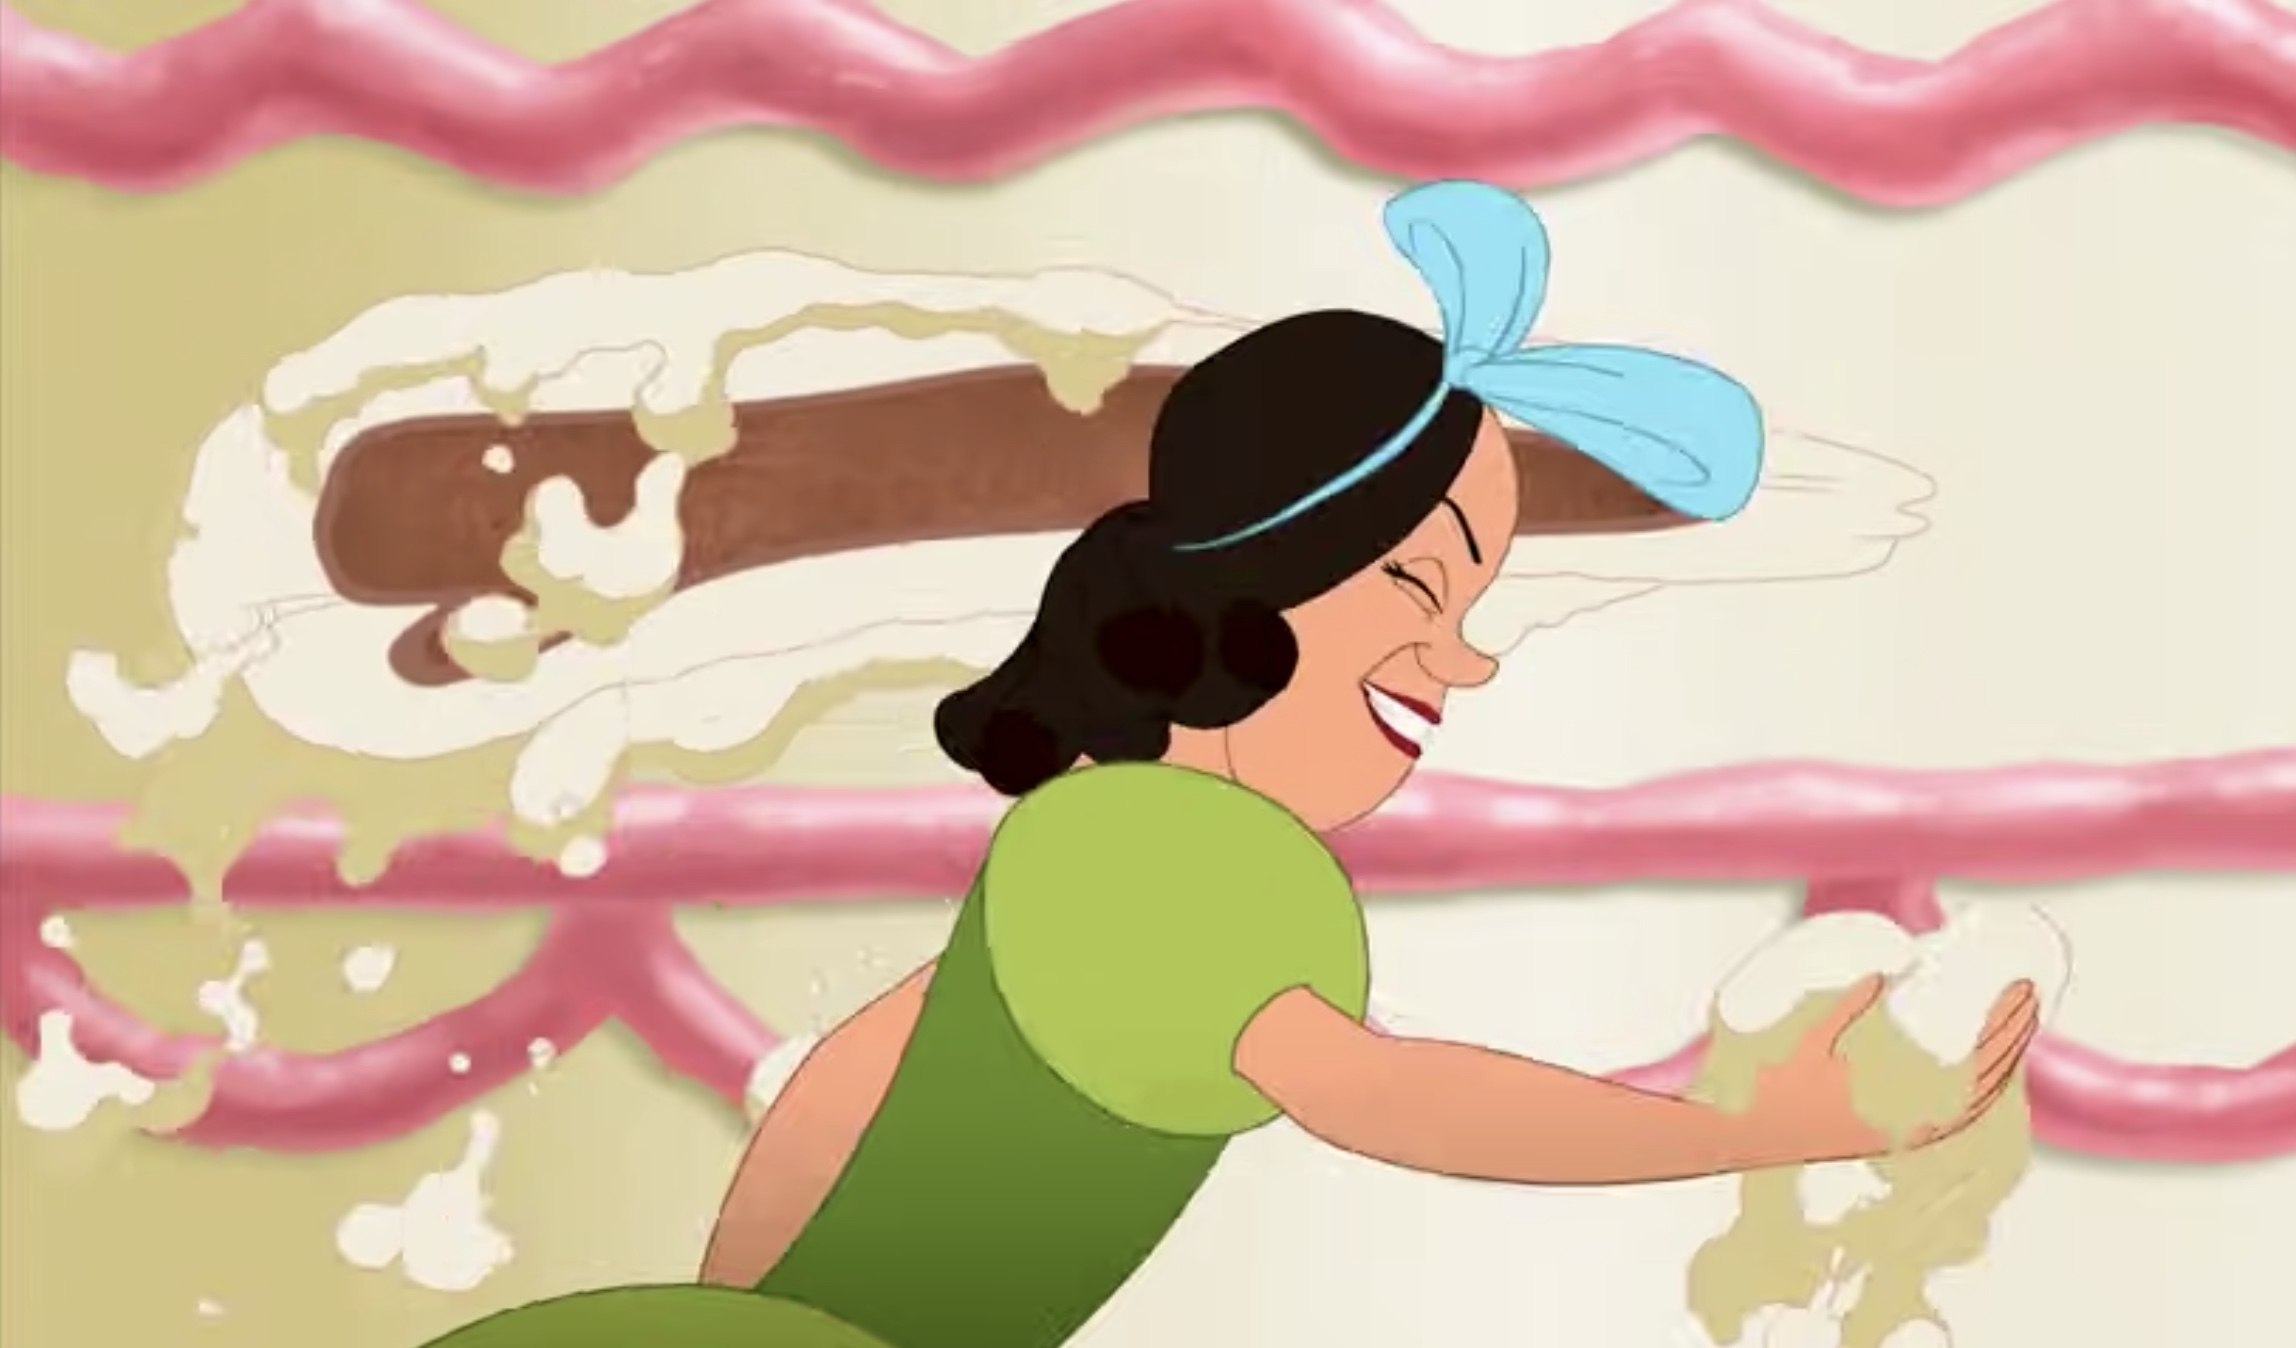 Drizella swiping a large handful of frosting off a large cake